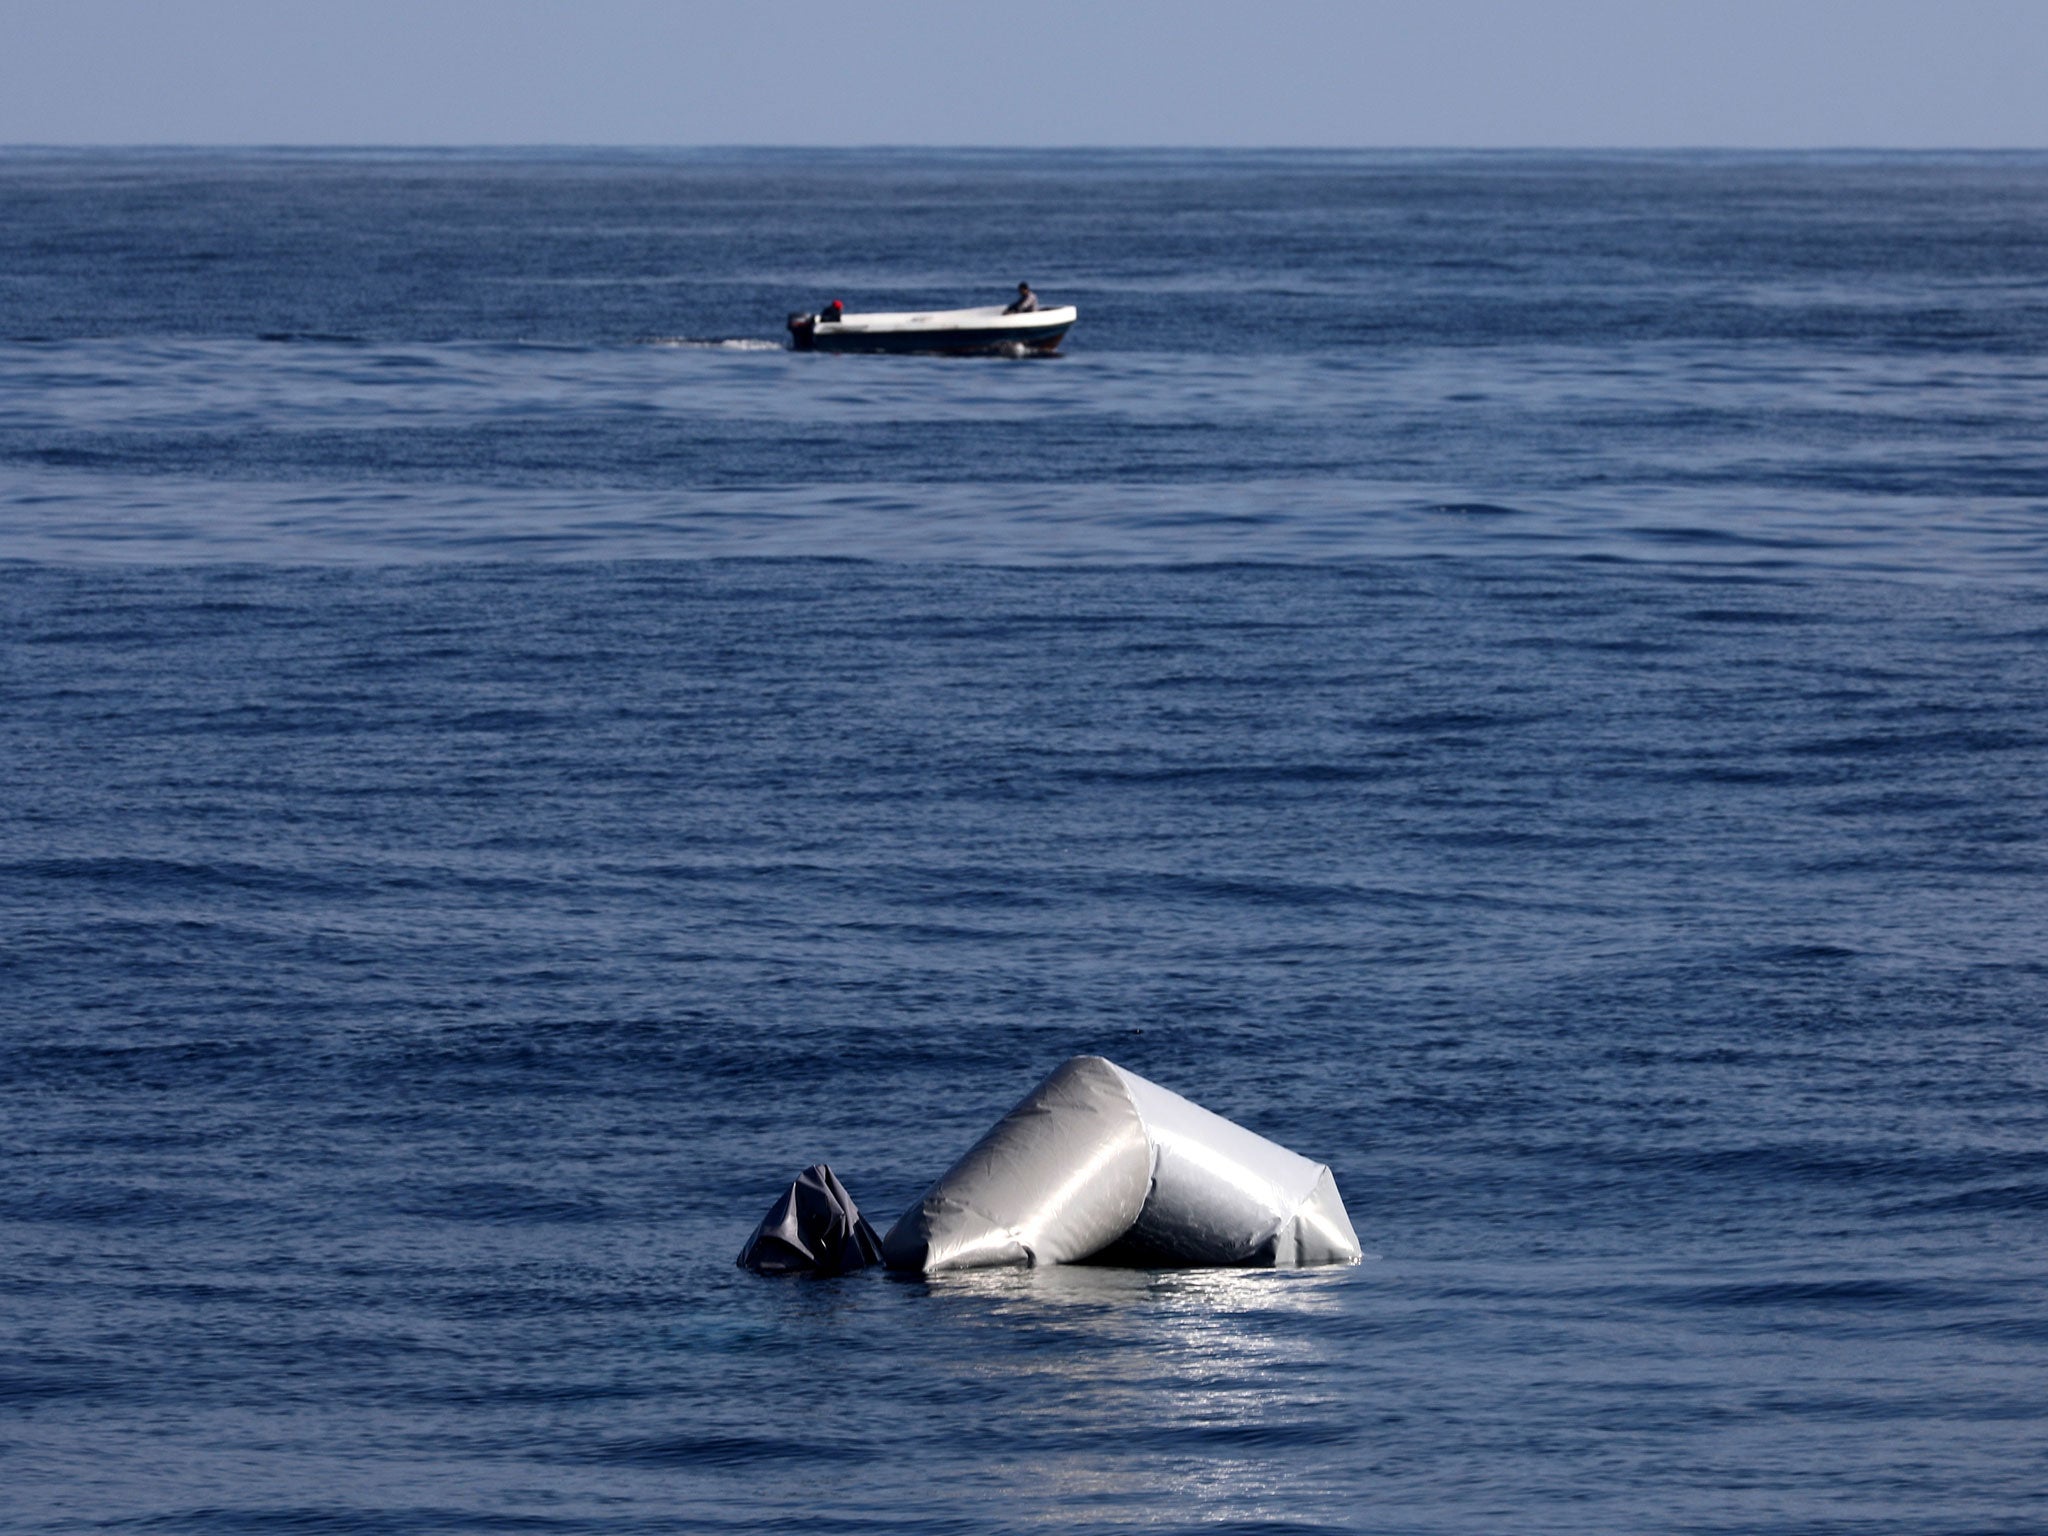 Latest disaster comes days after two dinghies found sunk in the Mediterranean Sea